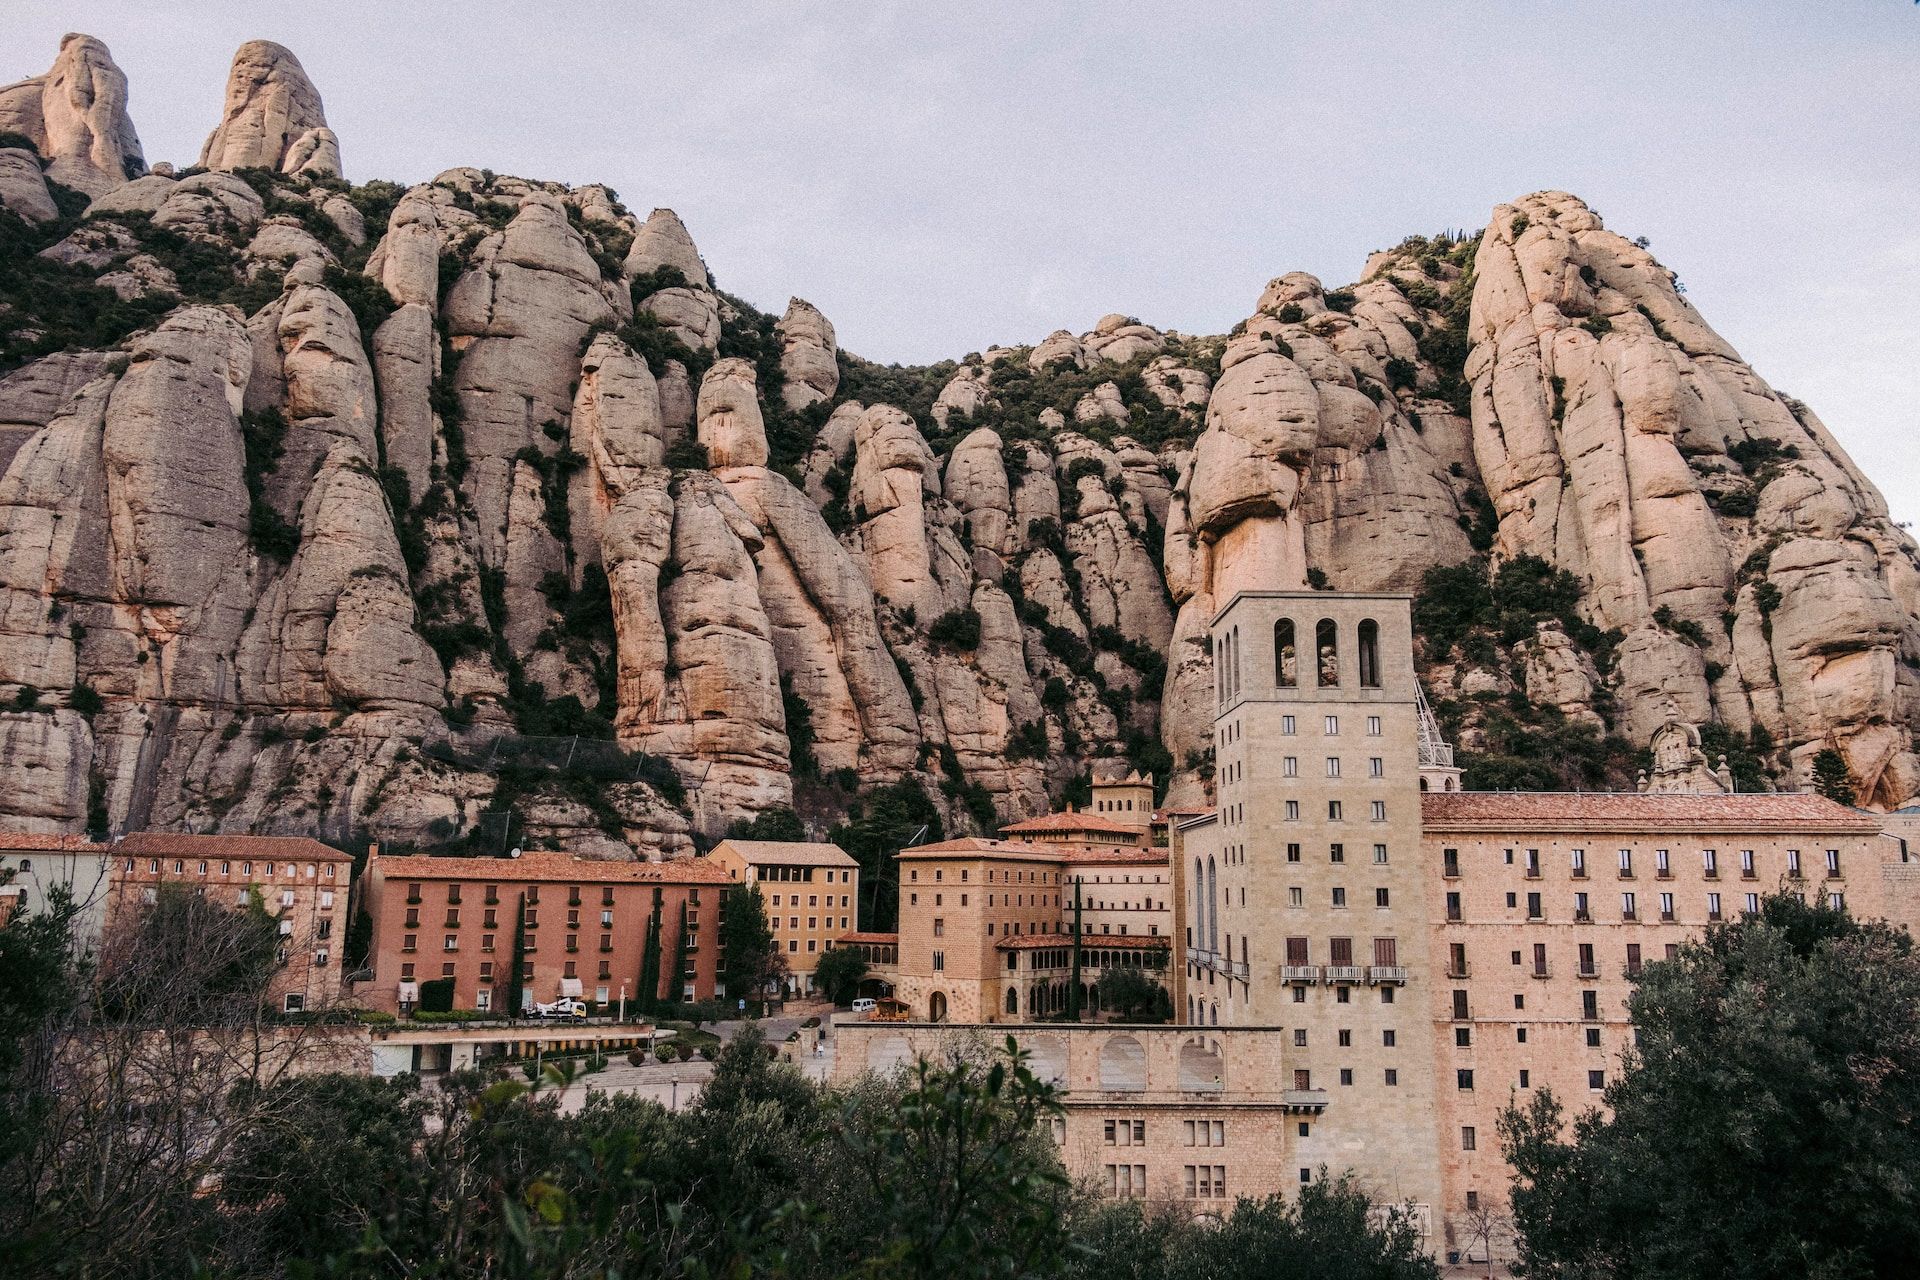 Montserrat Monastery with the jagged Montserrat mountains as a backdrop